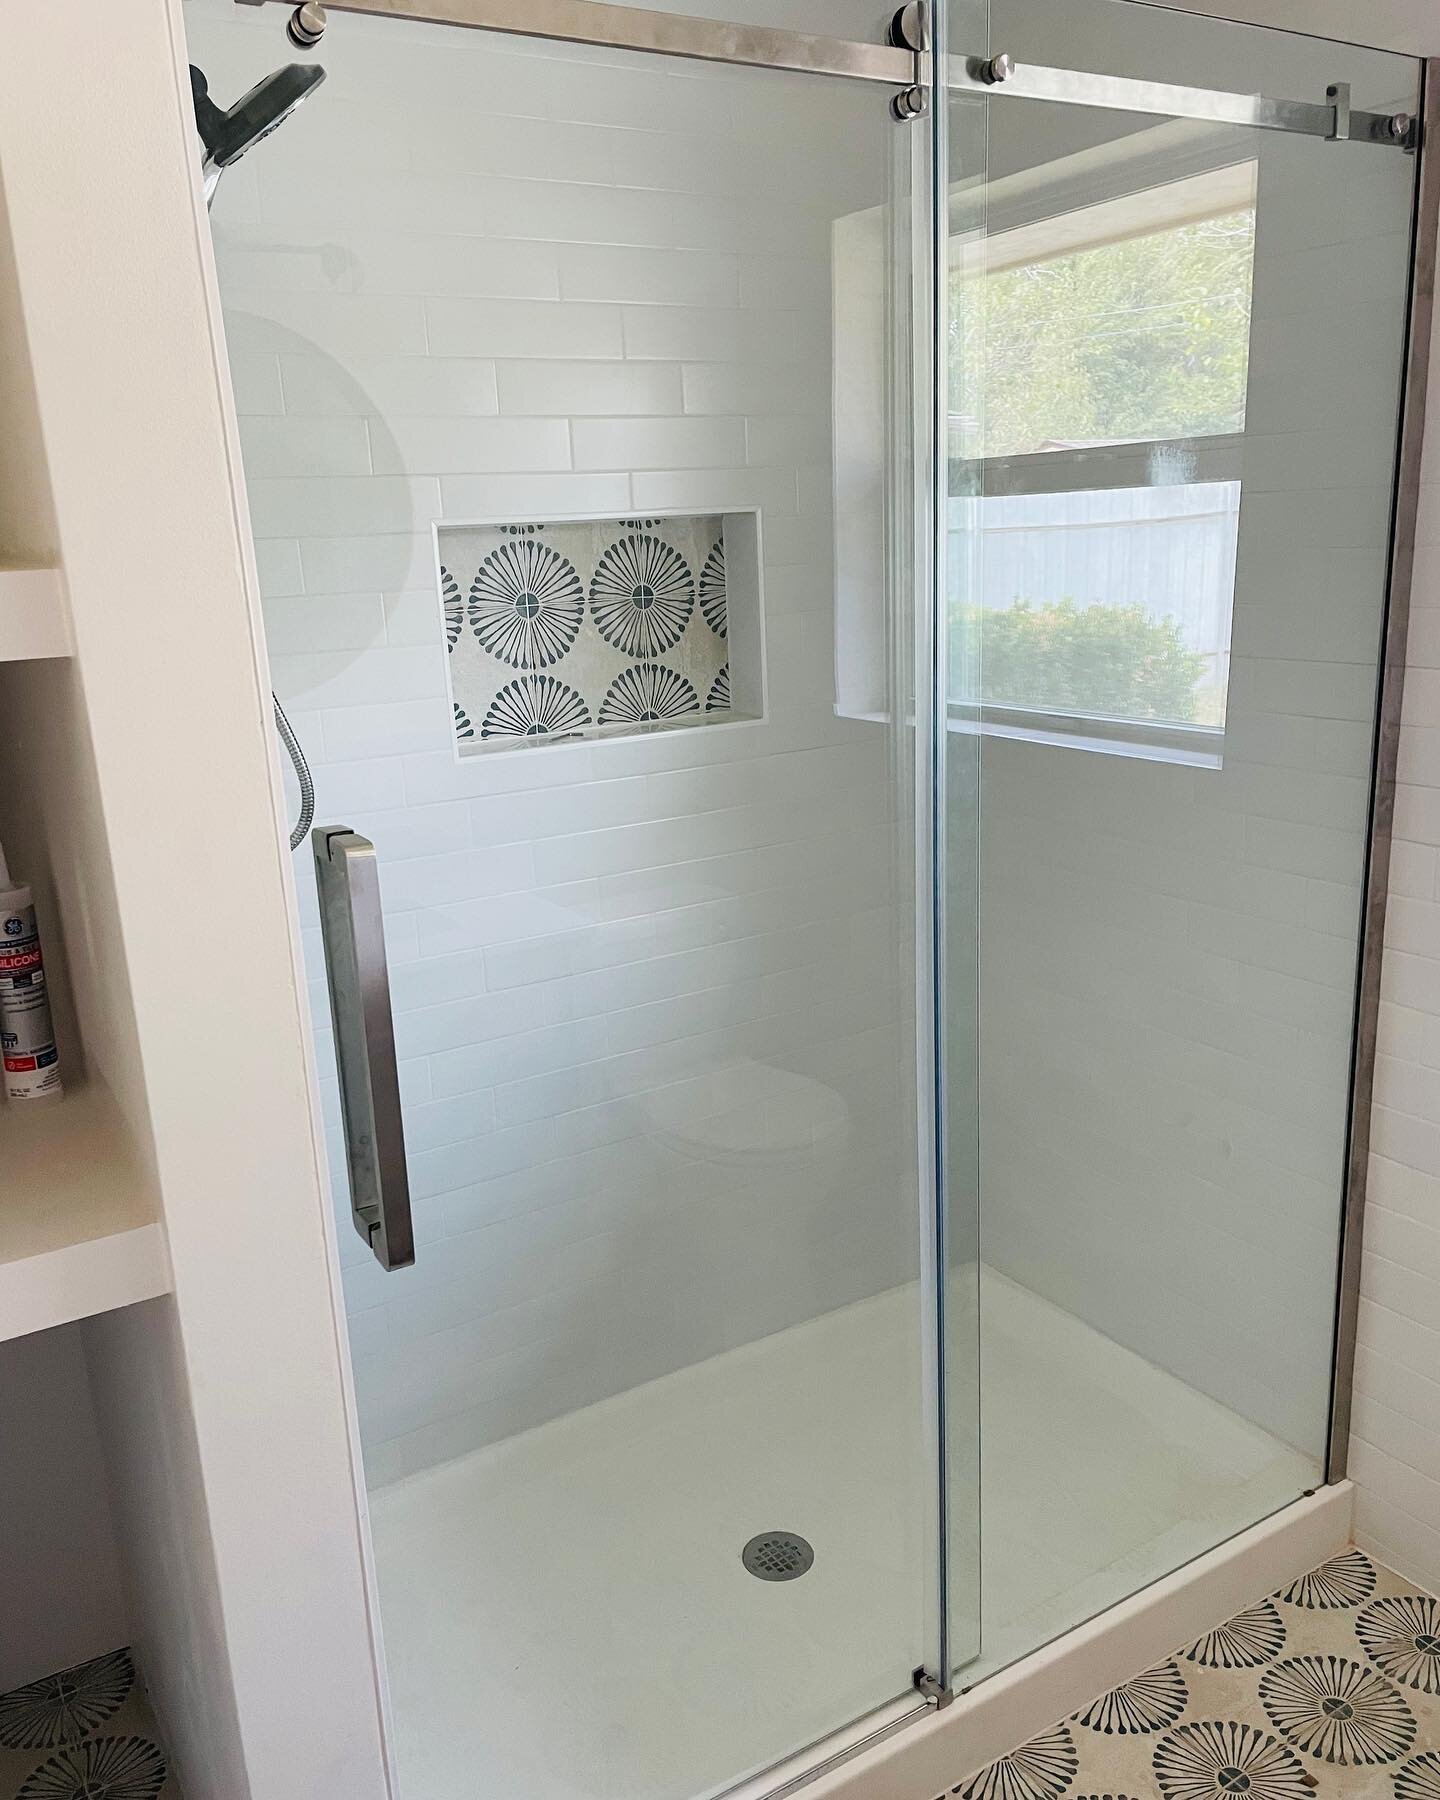 Our client remodeled this home before moving in and along with a new kitchen and floors throughout, they wanted a brand new bathroom with a walk in shower. 
-
Swipe for before! ➡️ 
-
- 
#gaytancontracting #contractor #homerenovation #homeremodel #rem